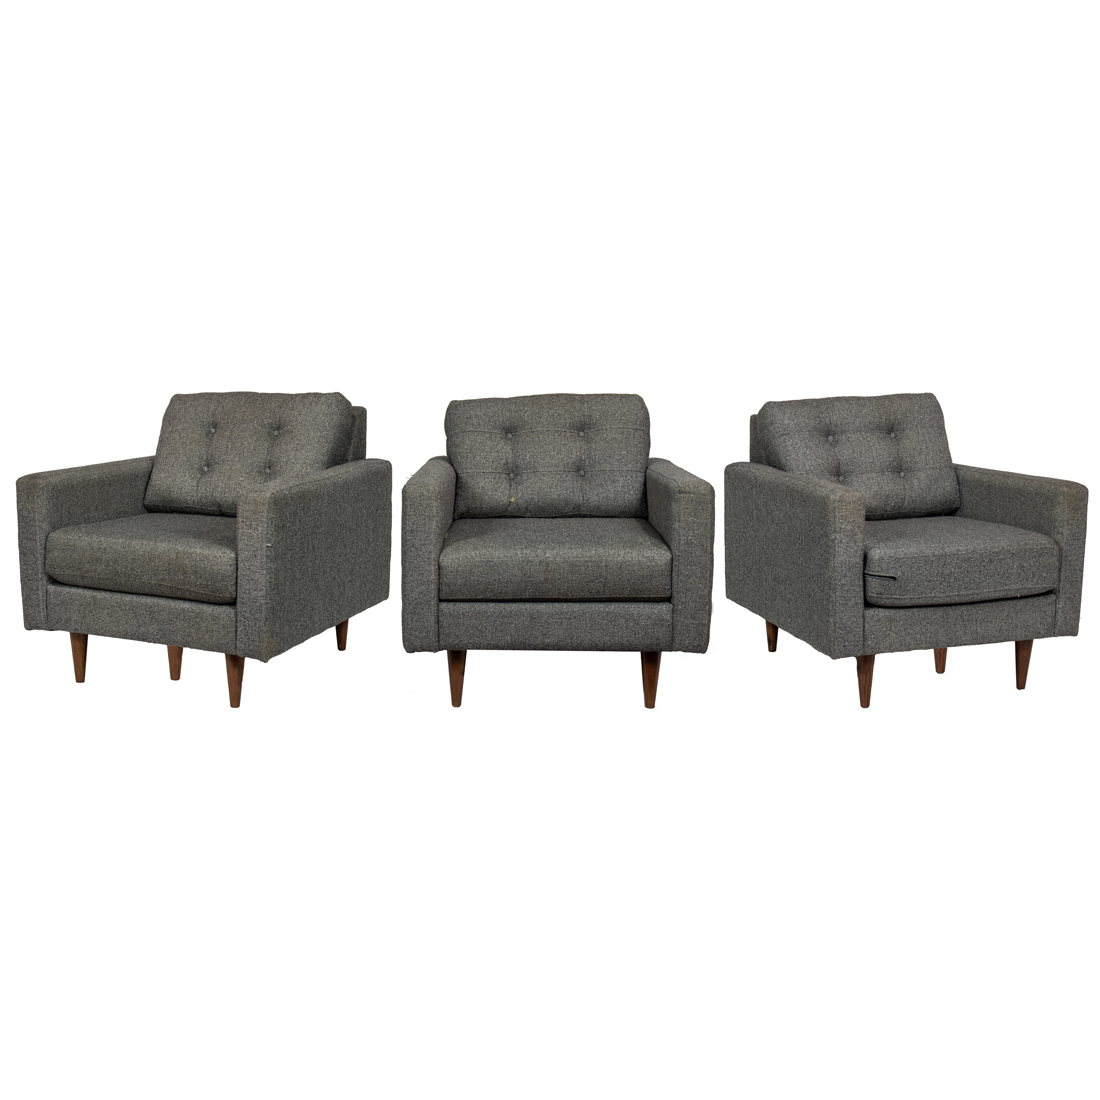 A SET OF THREE MODERN UPHOLSTERED